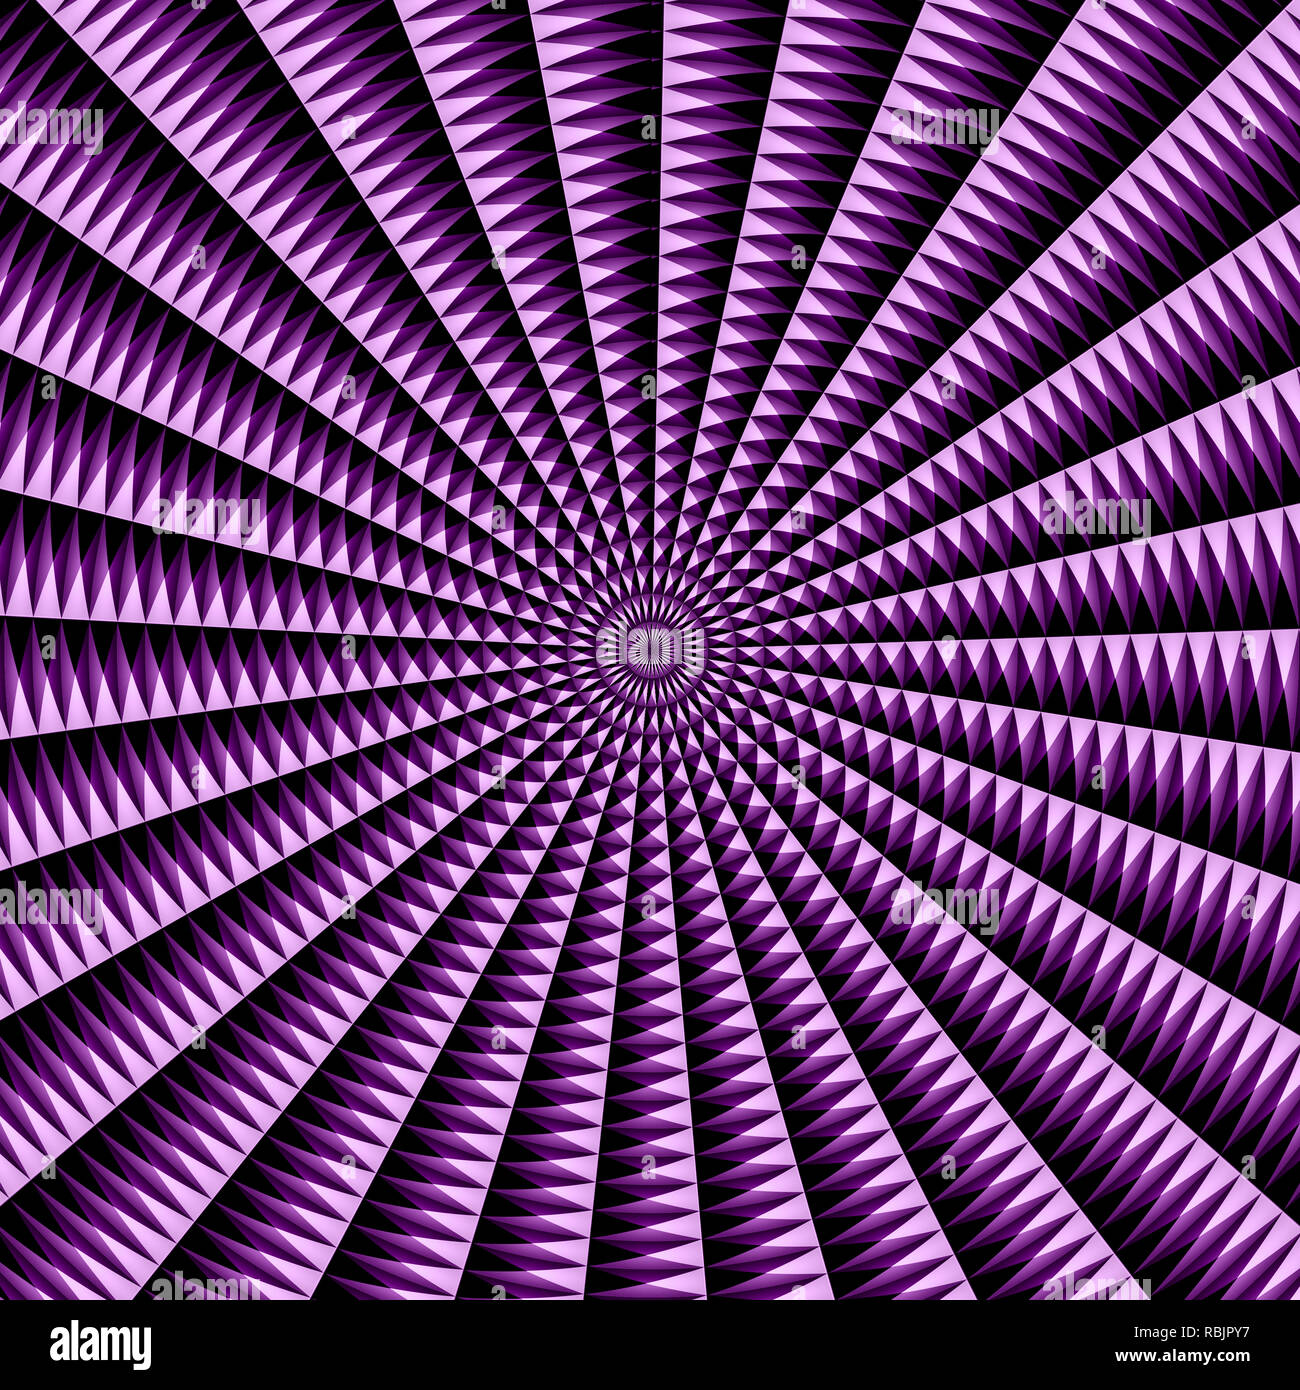 Lilac colored Radial abstract three-dimensional background pattern. Hallucinogenic background texture. Stock Photo